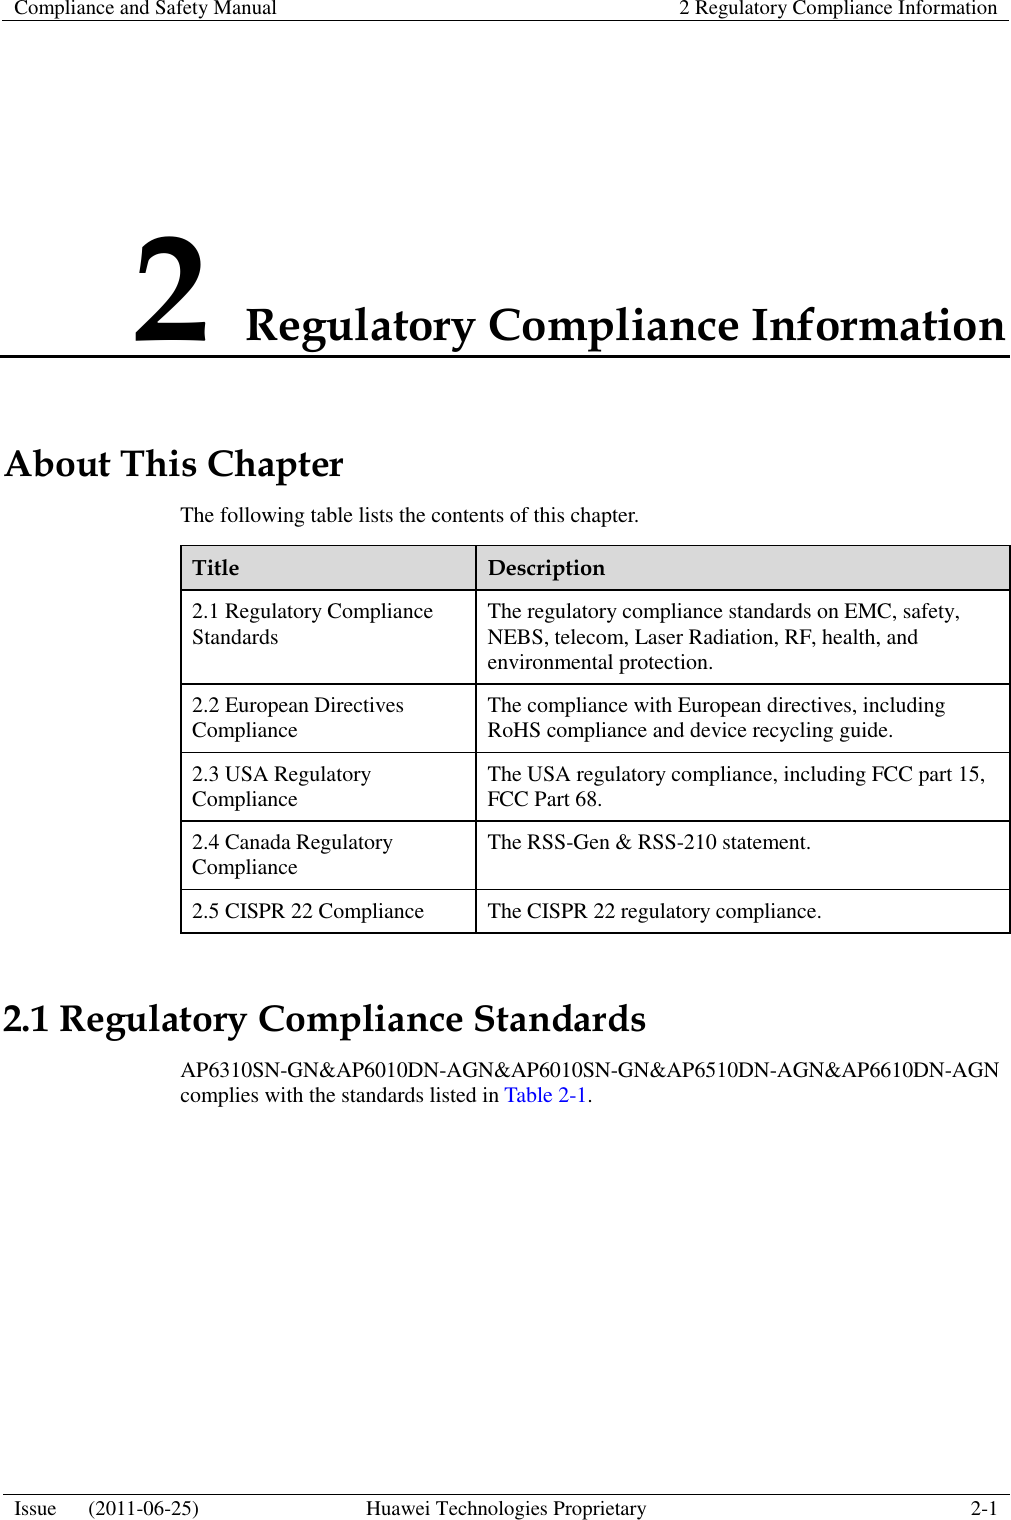 Compliance and Safety Manual 2 Regulatory Compliance Information  Issue      (2011-06-25) Huawei Technologies Proprietary 2-1  2 Regulatory Compliance Information About This Chapter The following table lists the contents of this chapter. Title Description 2.1 Regulatory Compliance Standards The regulatory compliance standards on EMC, safety, NEBS, telecom, Laser Radiation, RF, health, and environmental protection. 2.2 European Directives Compliance The compliance with European directives, including RoHS compliance and device recycling guide. 2.3 USA Regulatory Compliance The USA regulatory compliance, including FCC part 15, FCC Part 68. 2.4 Canada Regulatory Compliance The RSS-Gen &amp; RSS-210 statement. 2.5 CISPR 22 Compliance The CISPR 22 regulatory compliance. 2.1 Regulatory Compliance Standards AP6310SN-GN&amp;AP6010DN-AGN&amp;AP6010SN-GN&amp;AP6510DN-AGN&amp;AP6610DN-AGN complies with the standards listed in Table 2-1. 